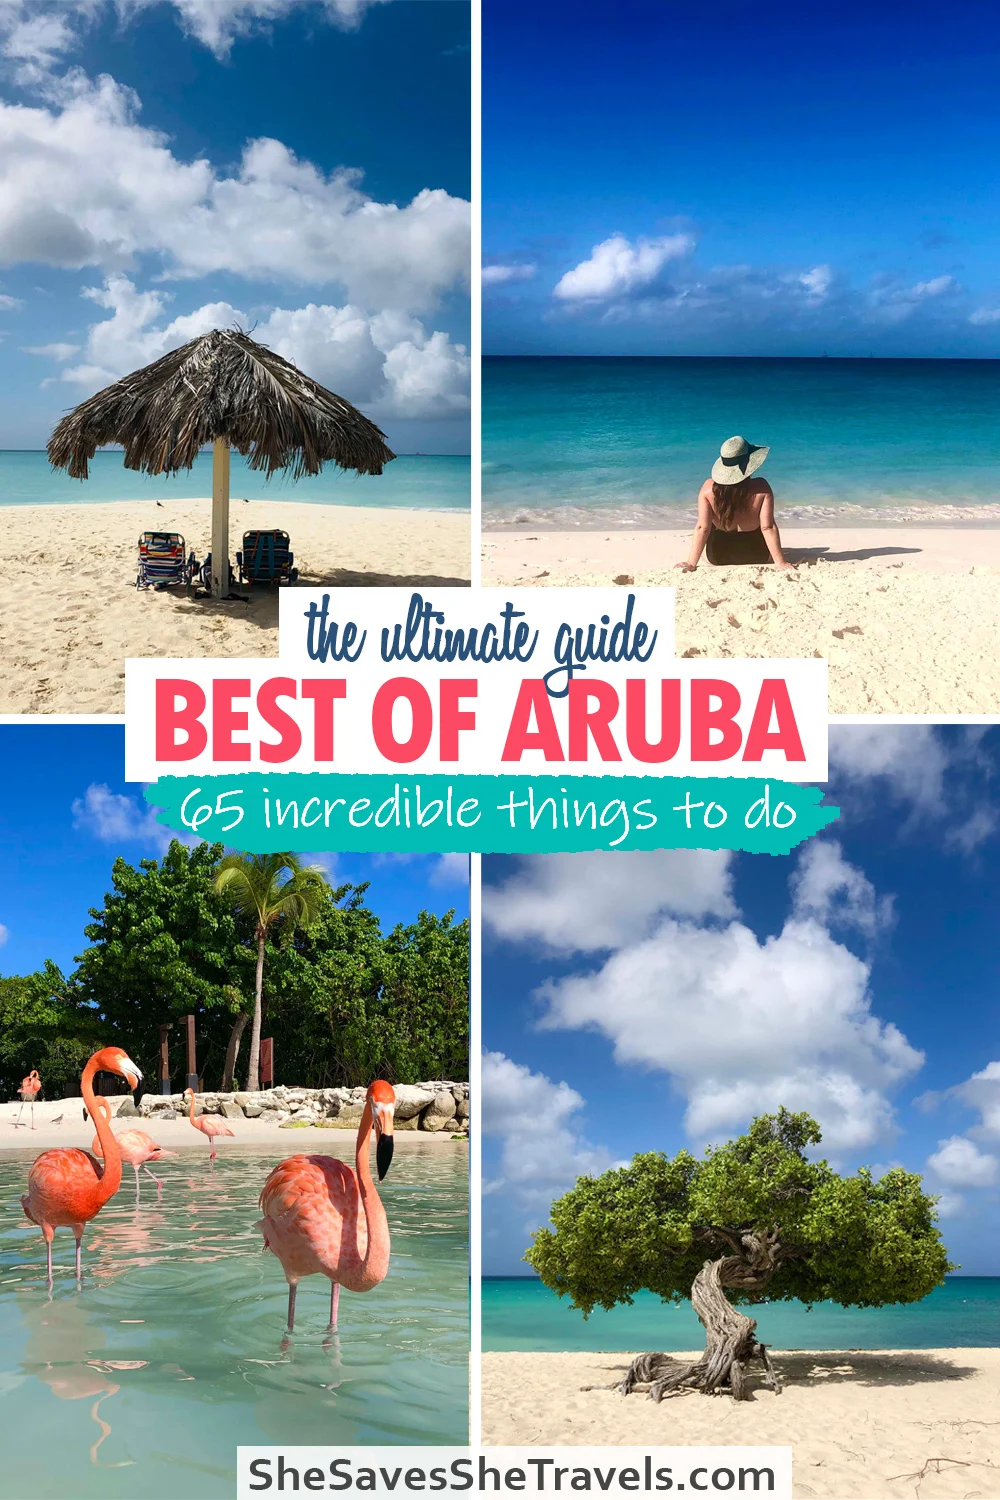 the ultimate guide best of aruba 65 incredible things to do